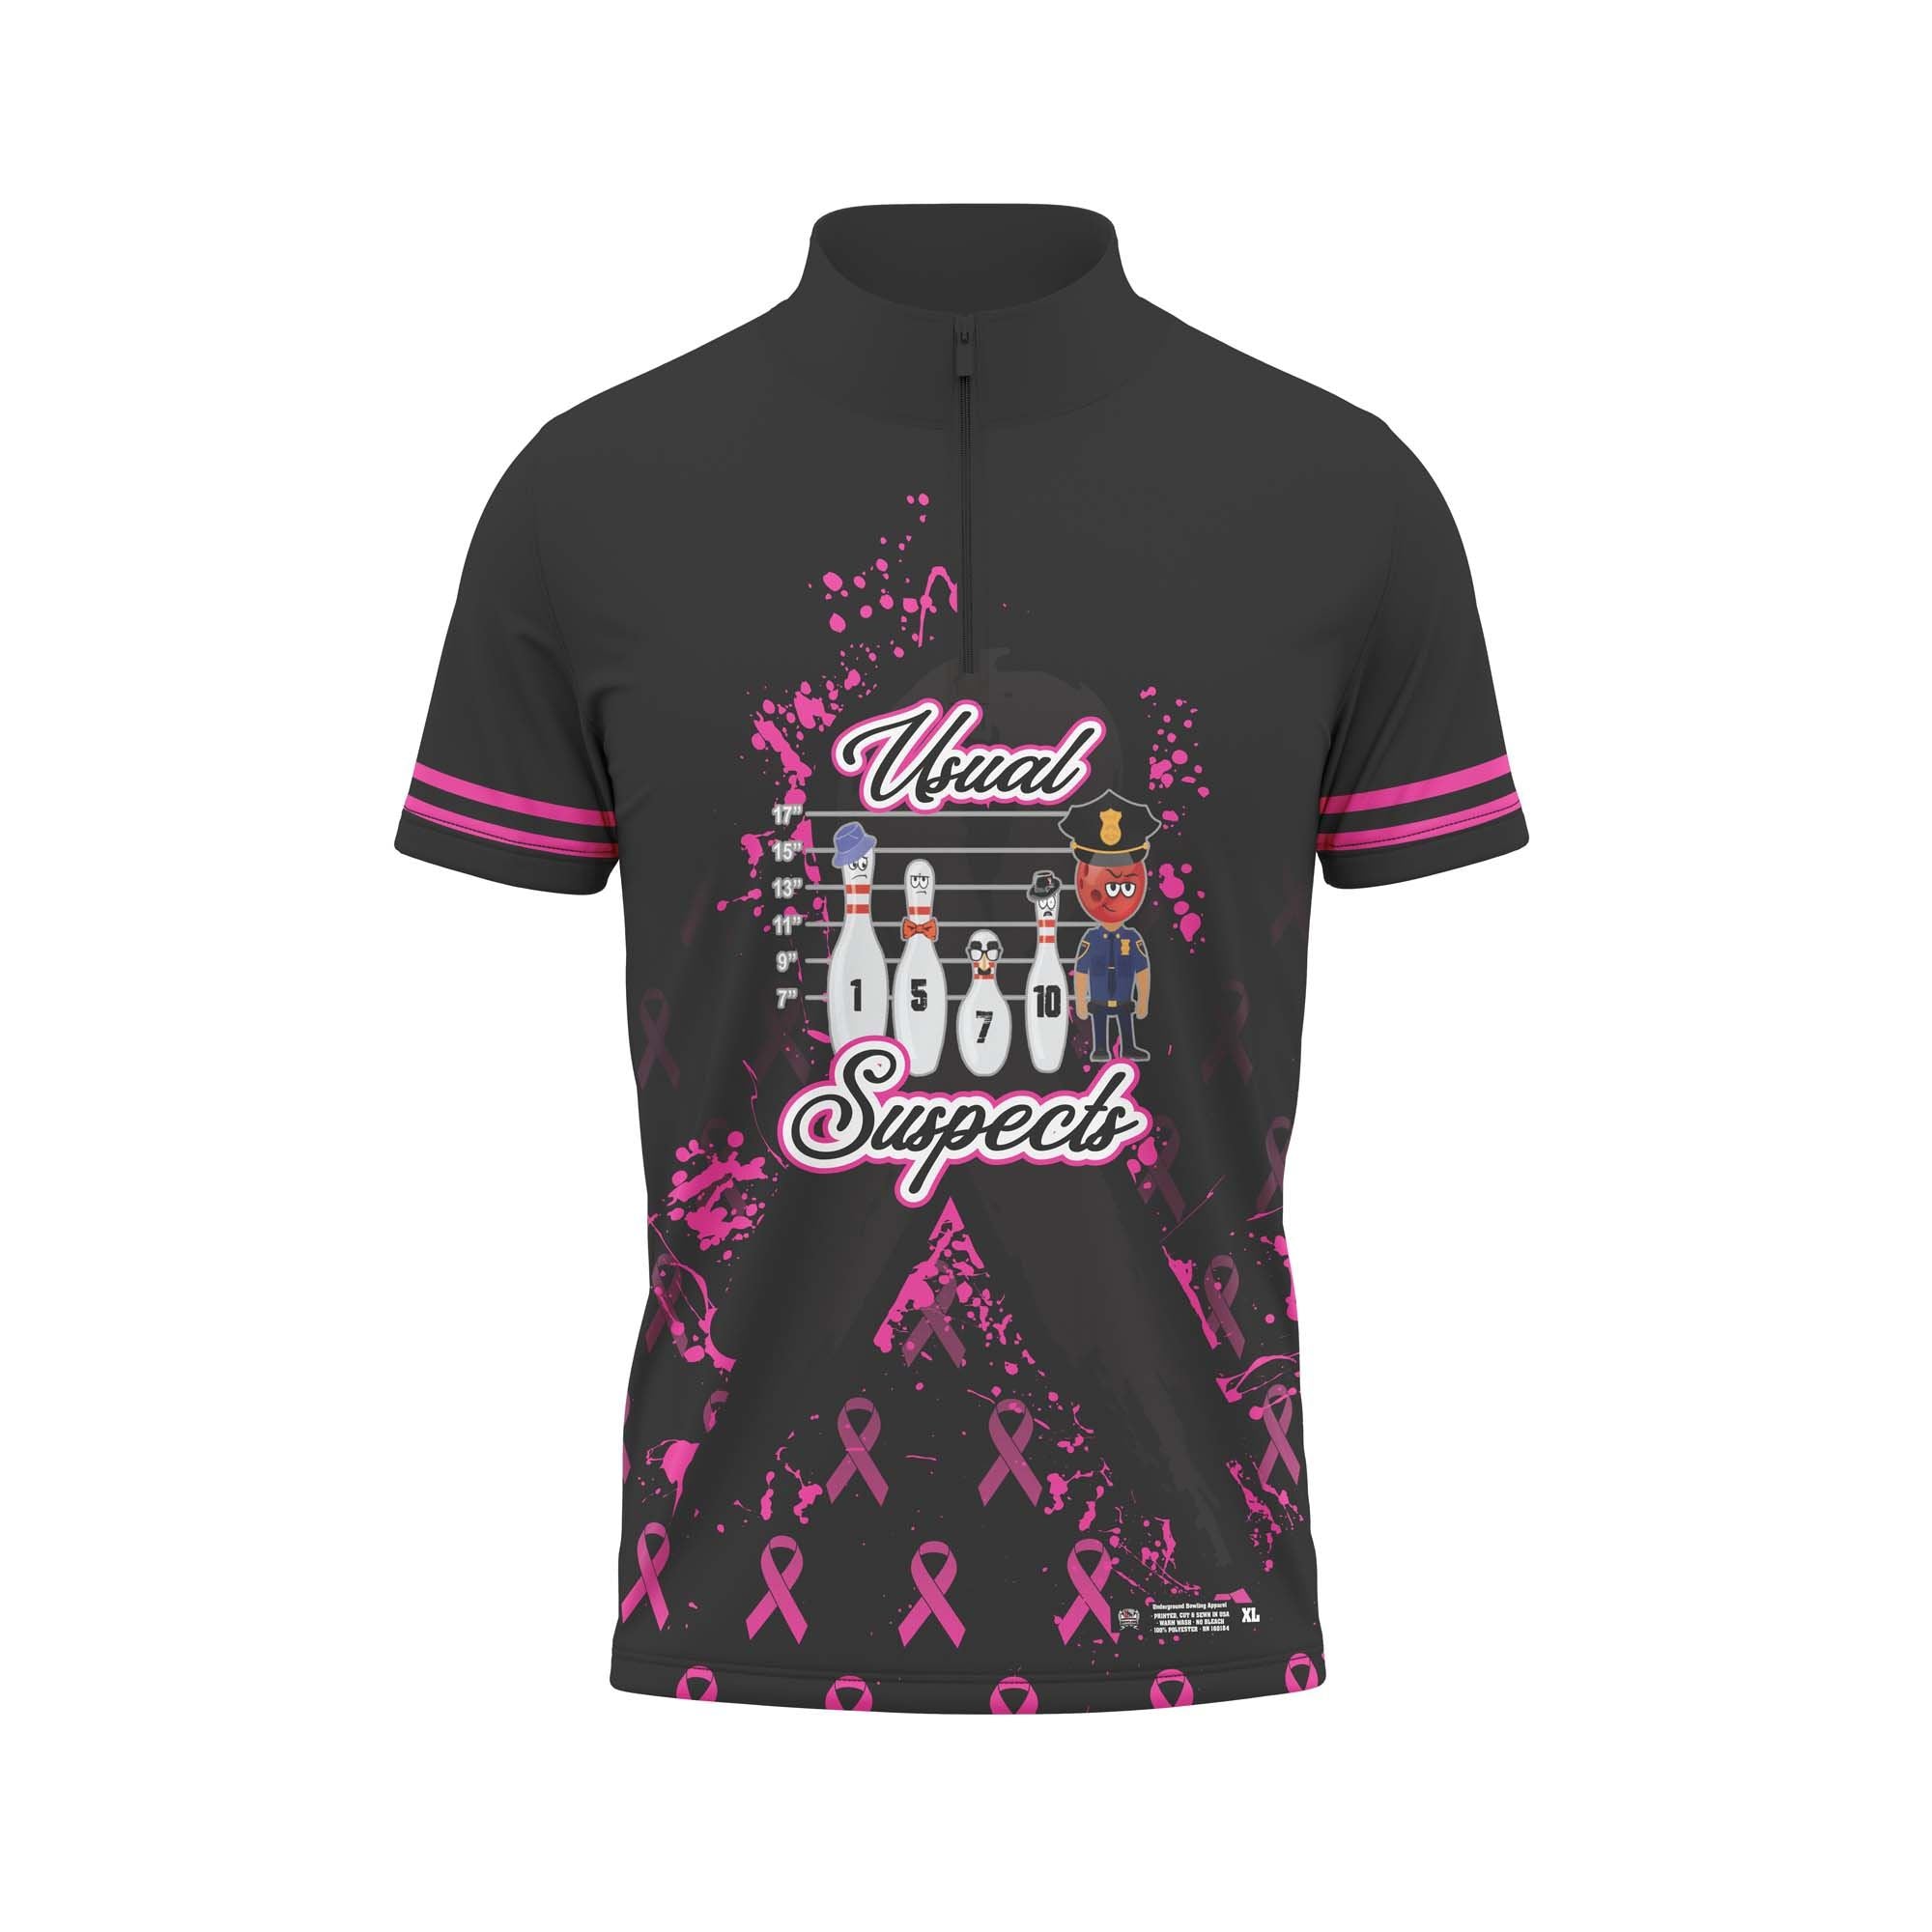 Usual Suspects Breast Cancer Jersey